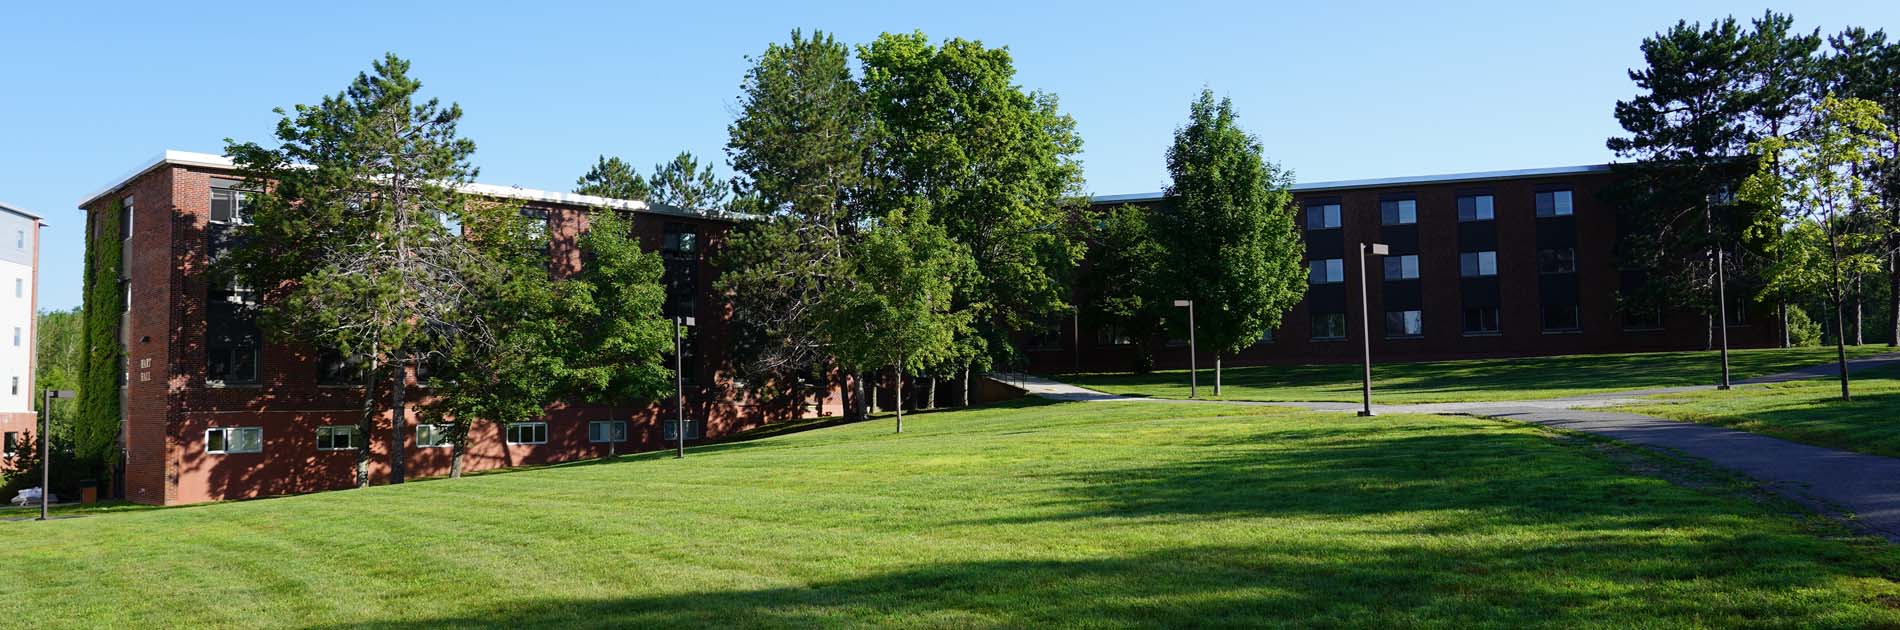 Hart Hall on the campus of Husson University